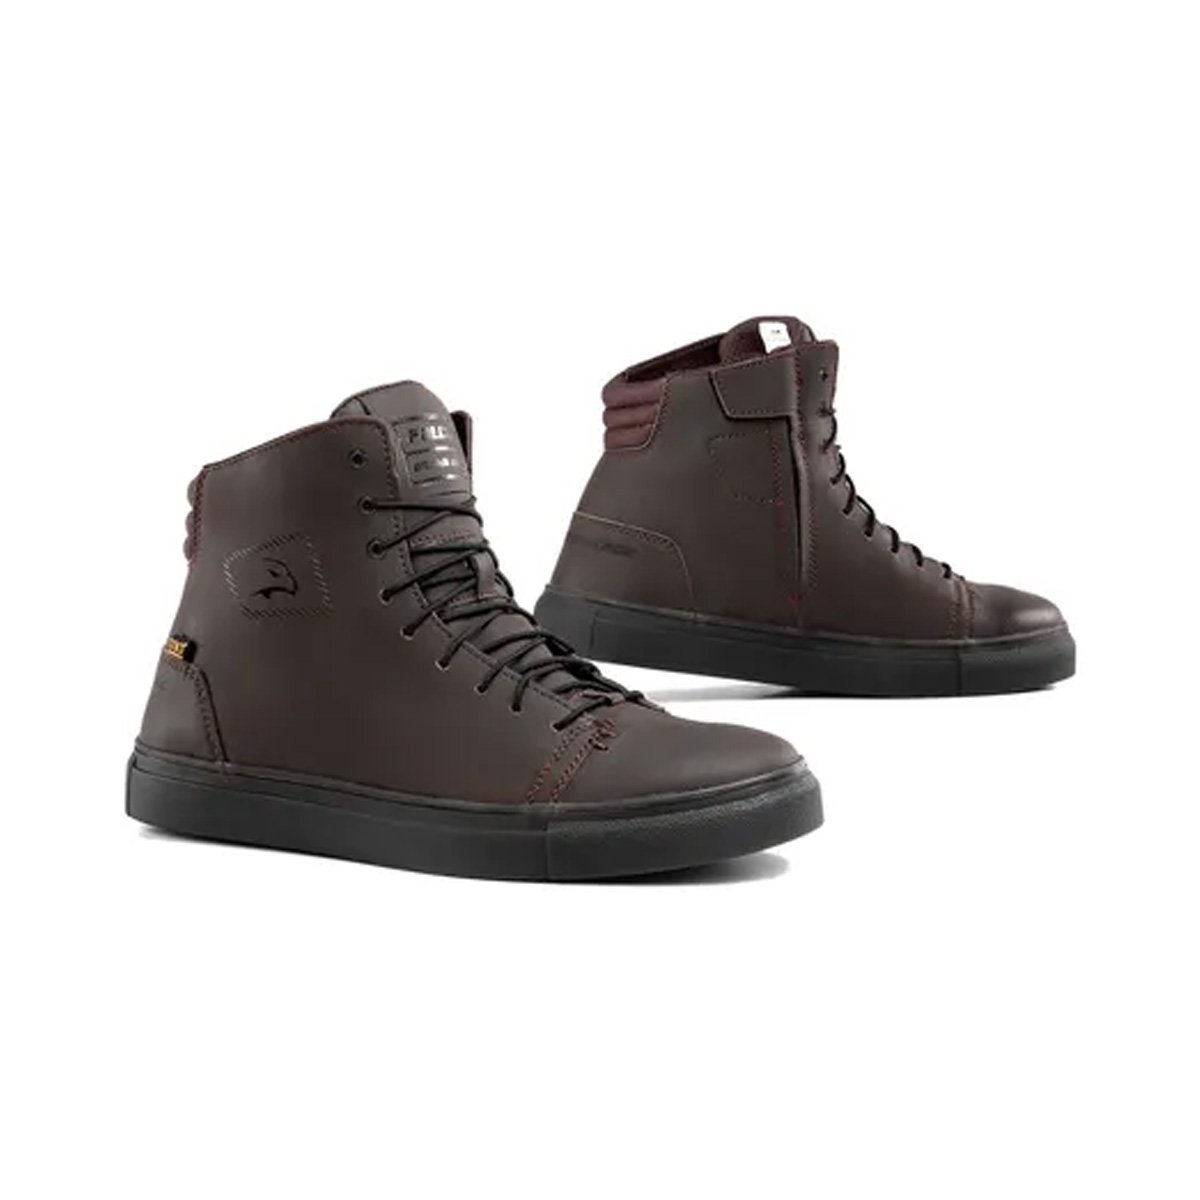 Image of Falco Nomad 2 Brown Size 40 ID 8052675494839